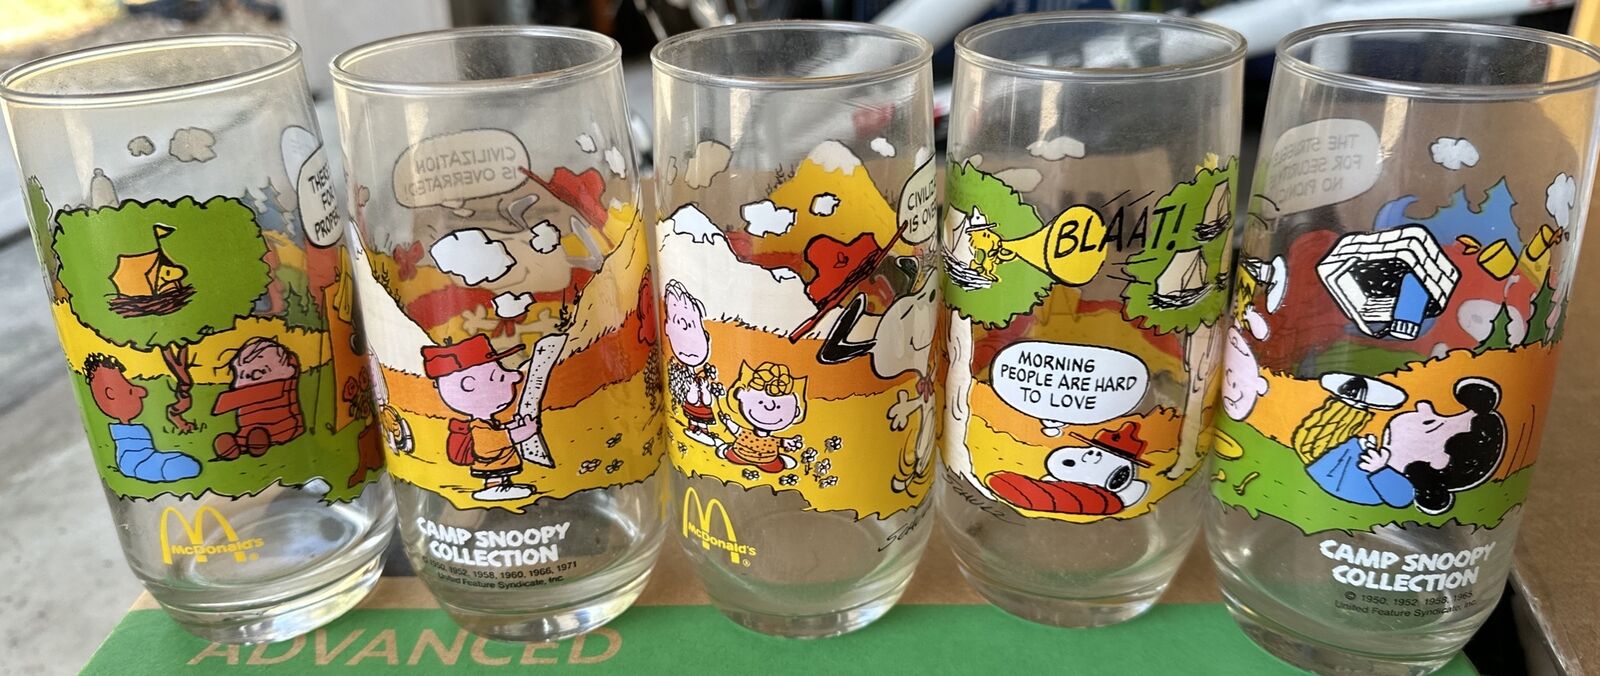 Vintage McDonald's Peanuts Camp Snoopy Collection Glasses Set of 5